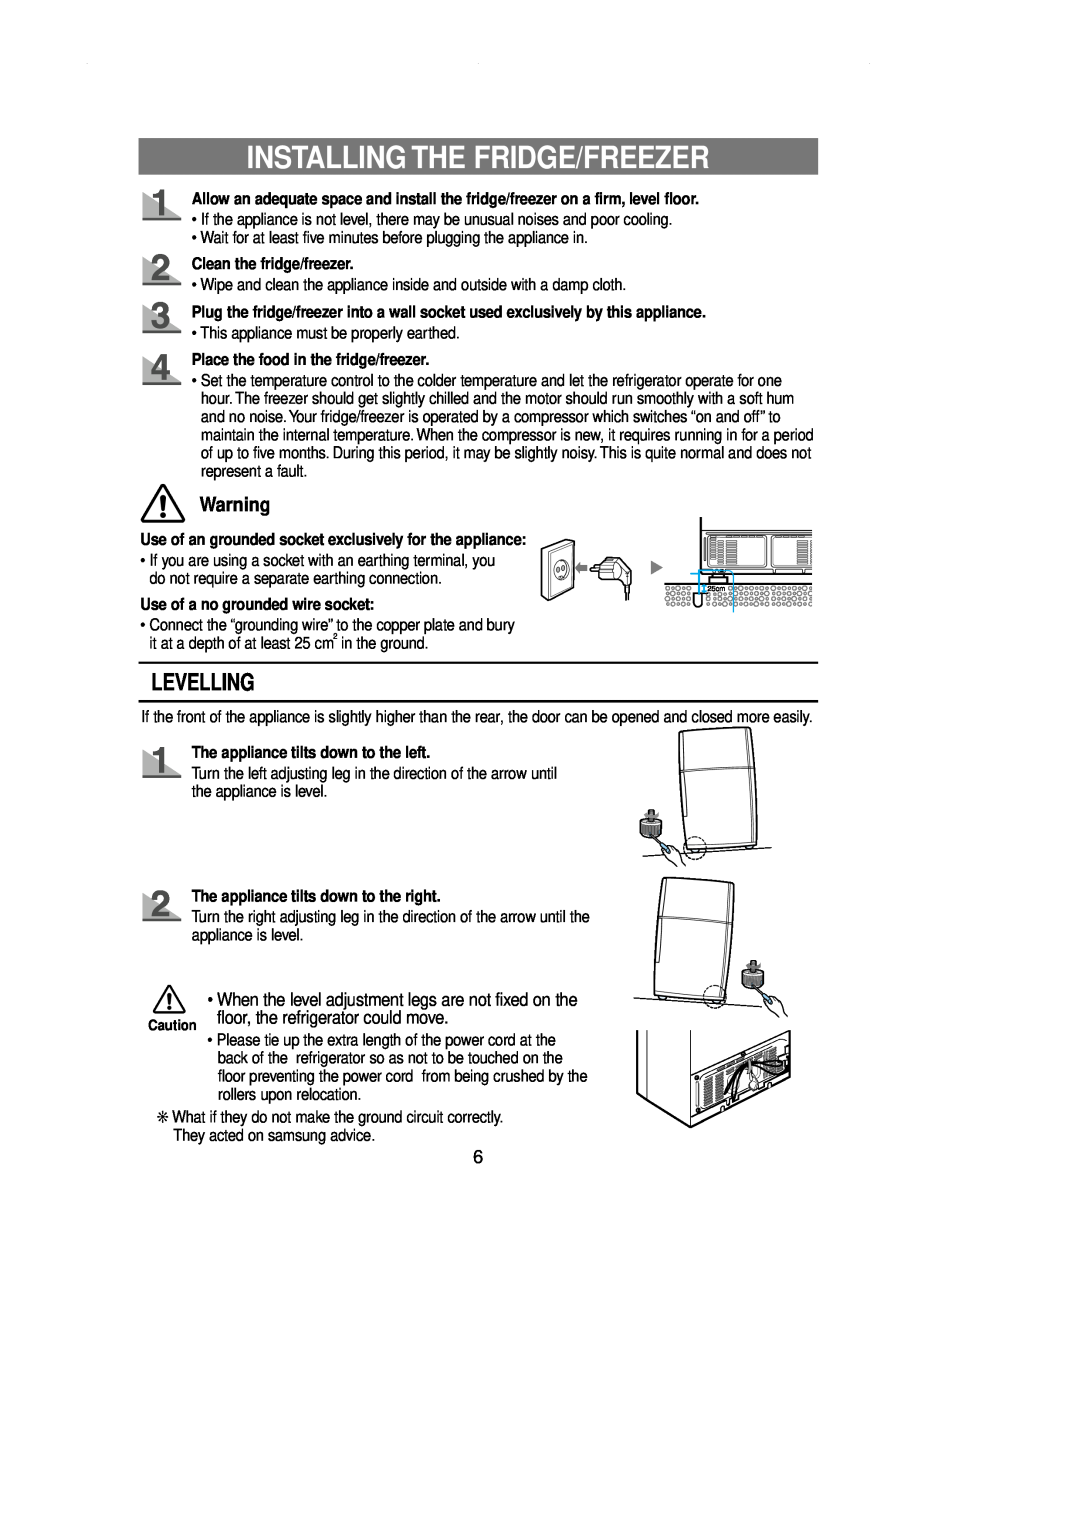 Samsung DA99-00743A Installing The Fridge/Freezer, Levelling, Clean the fridge/freezer, Use of a no grounded wire socket 